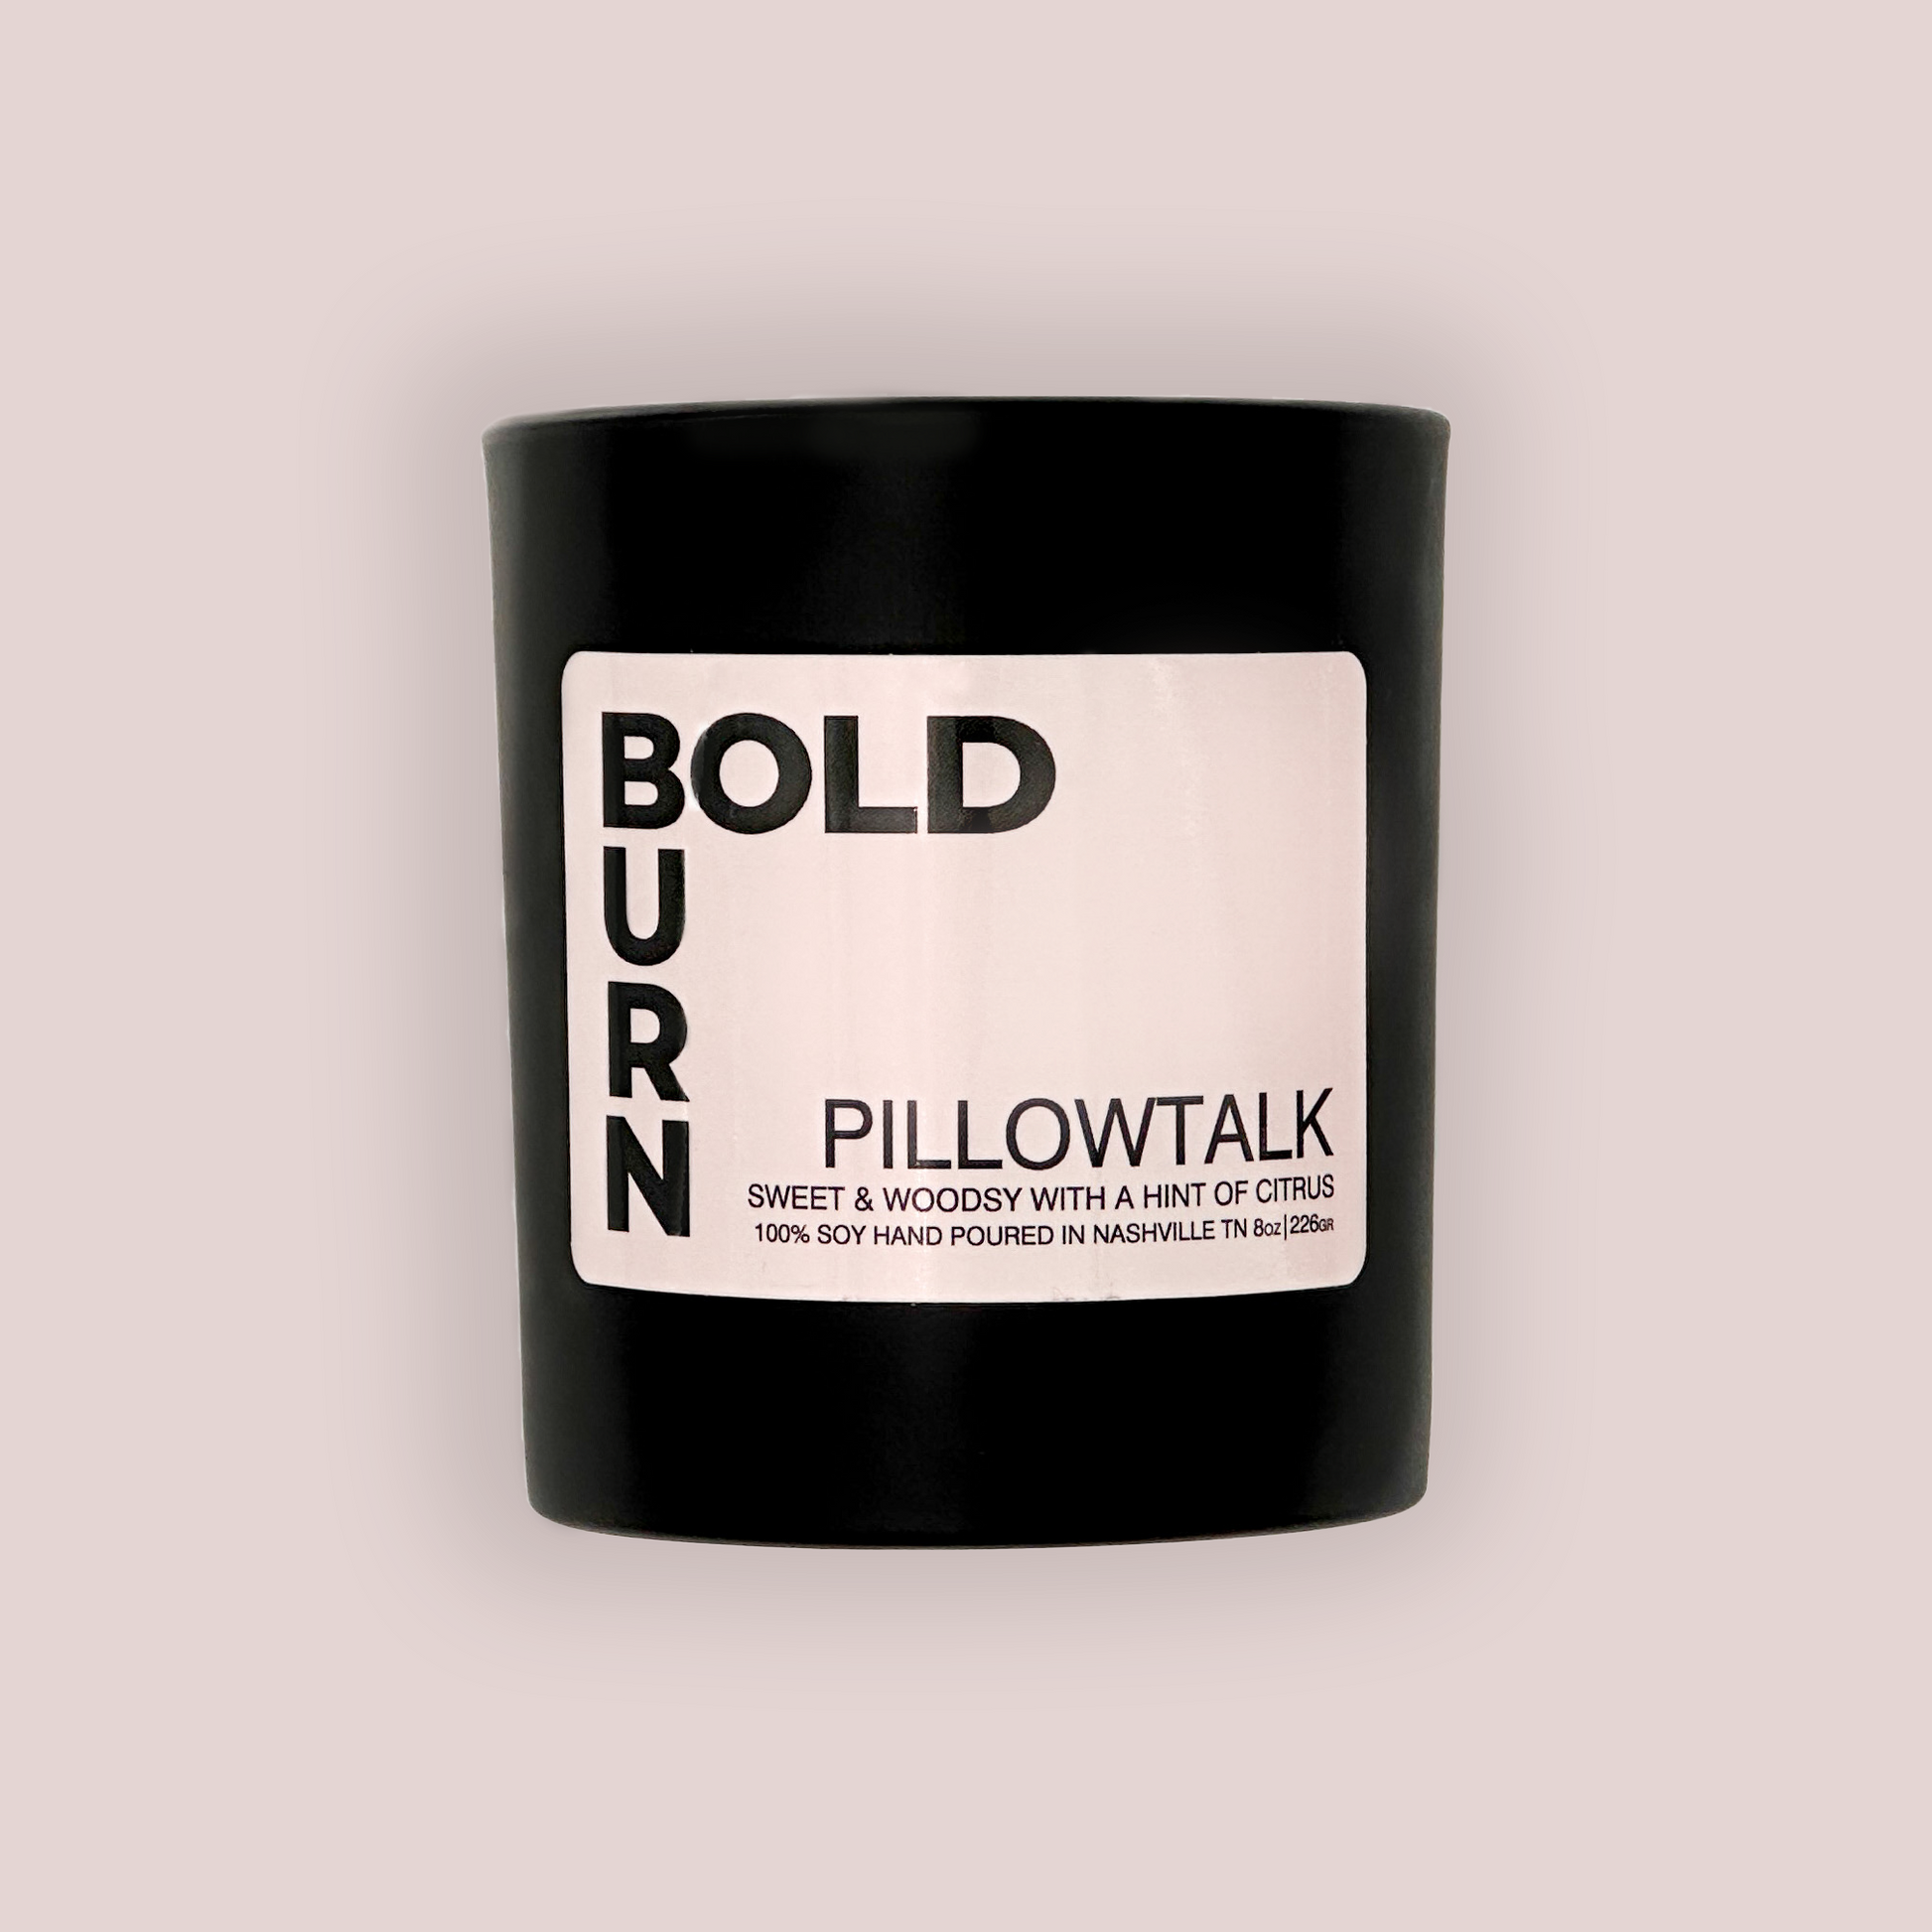 Two wick black candle with white label reading Bold Burn Pillowtalk: Sweet & Woodsy with a hint of Citrus on white background